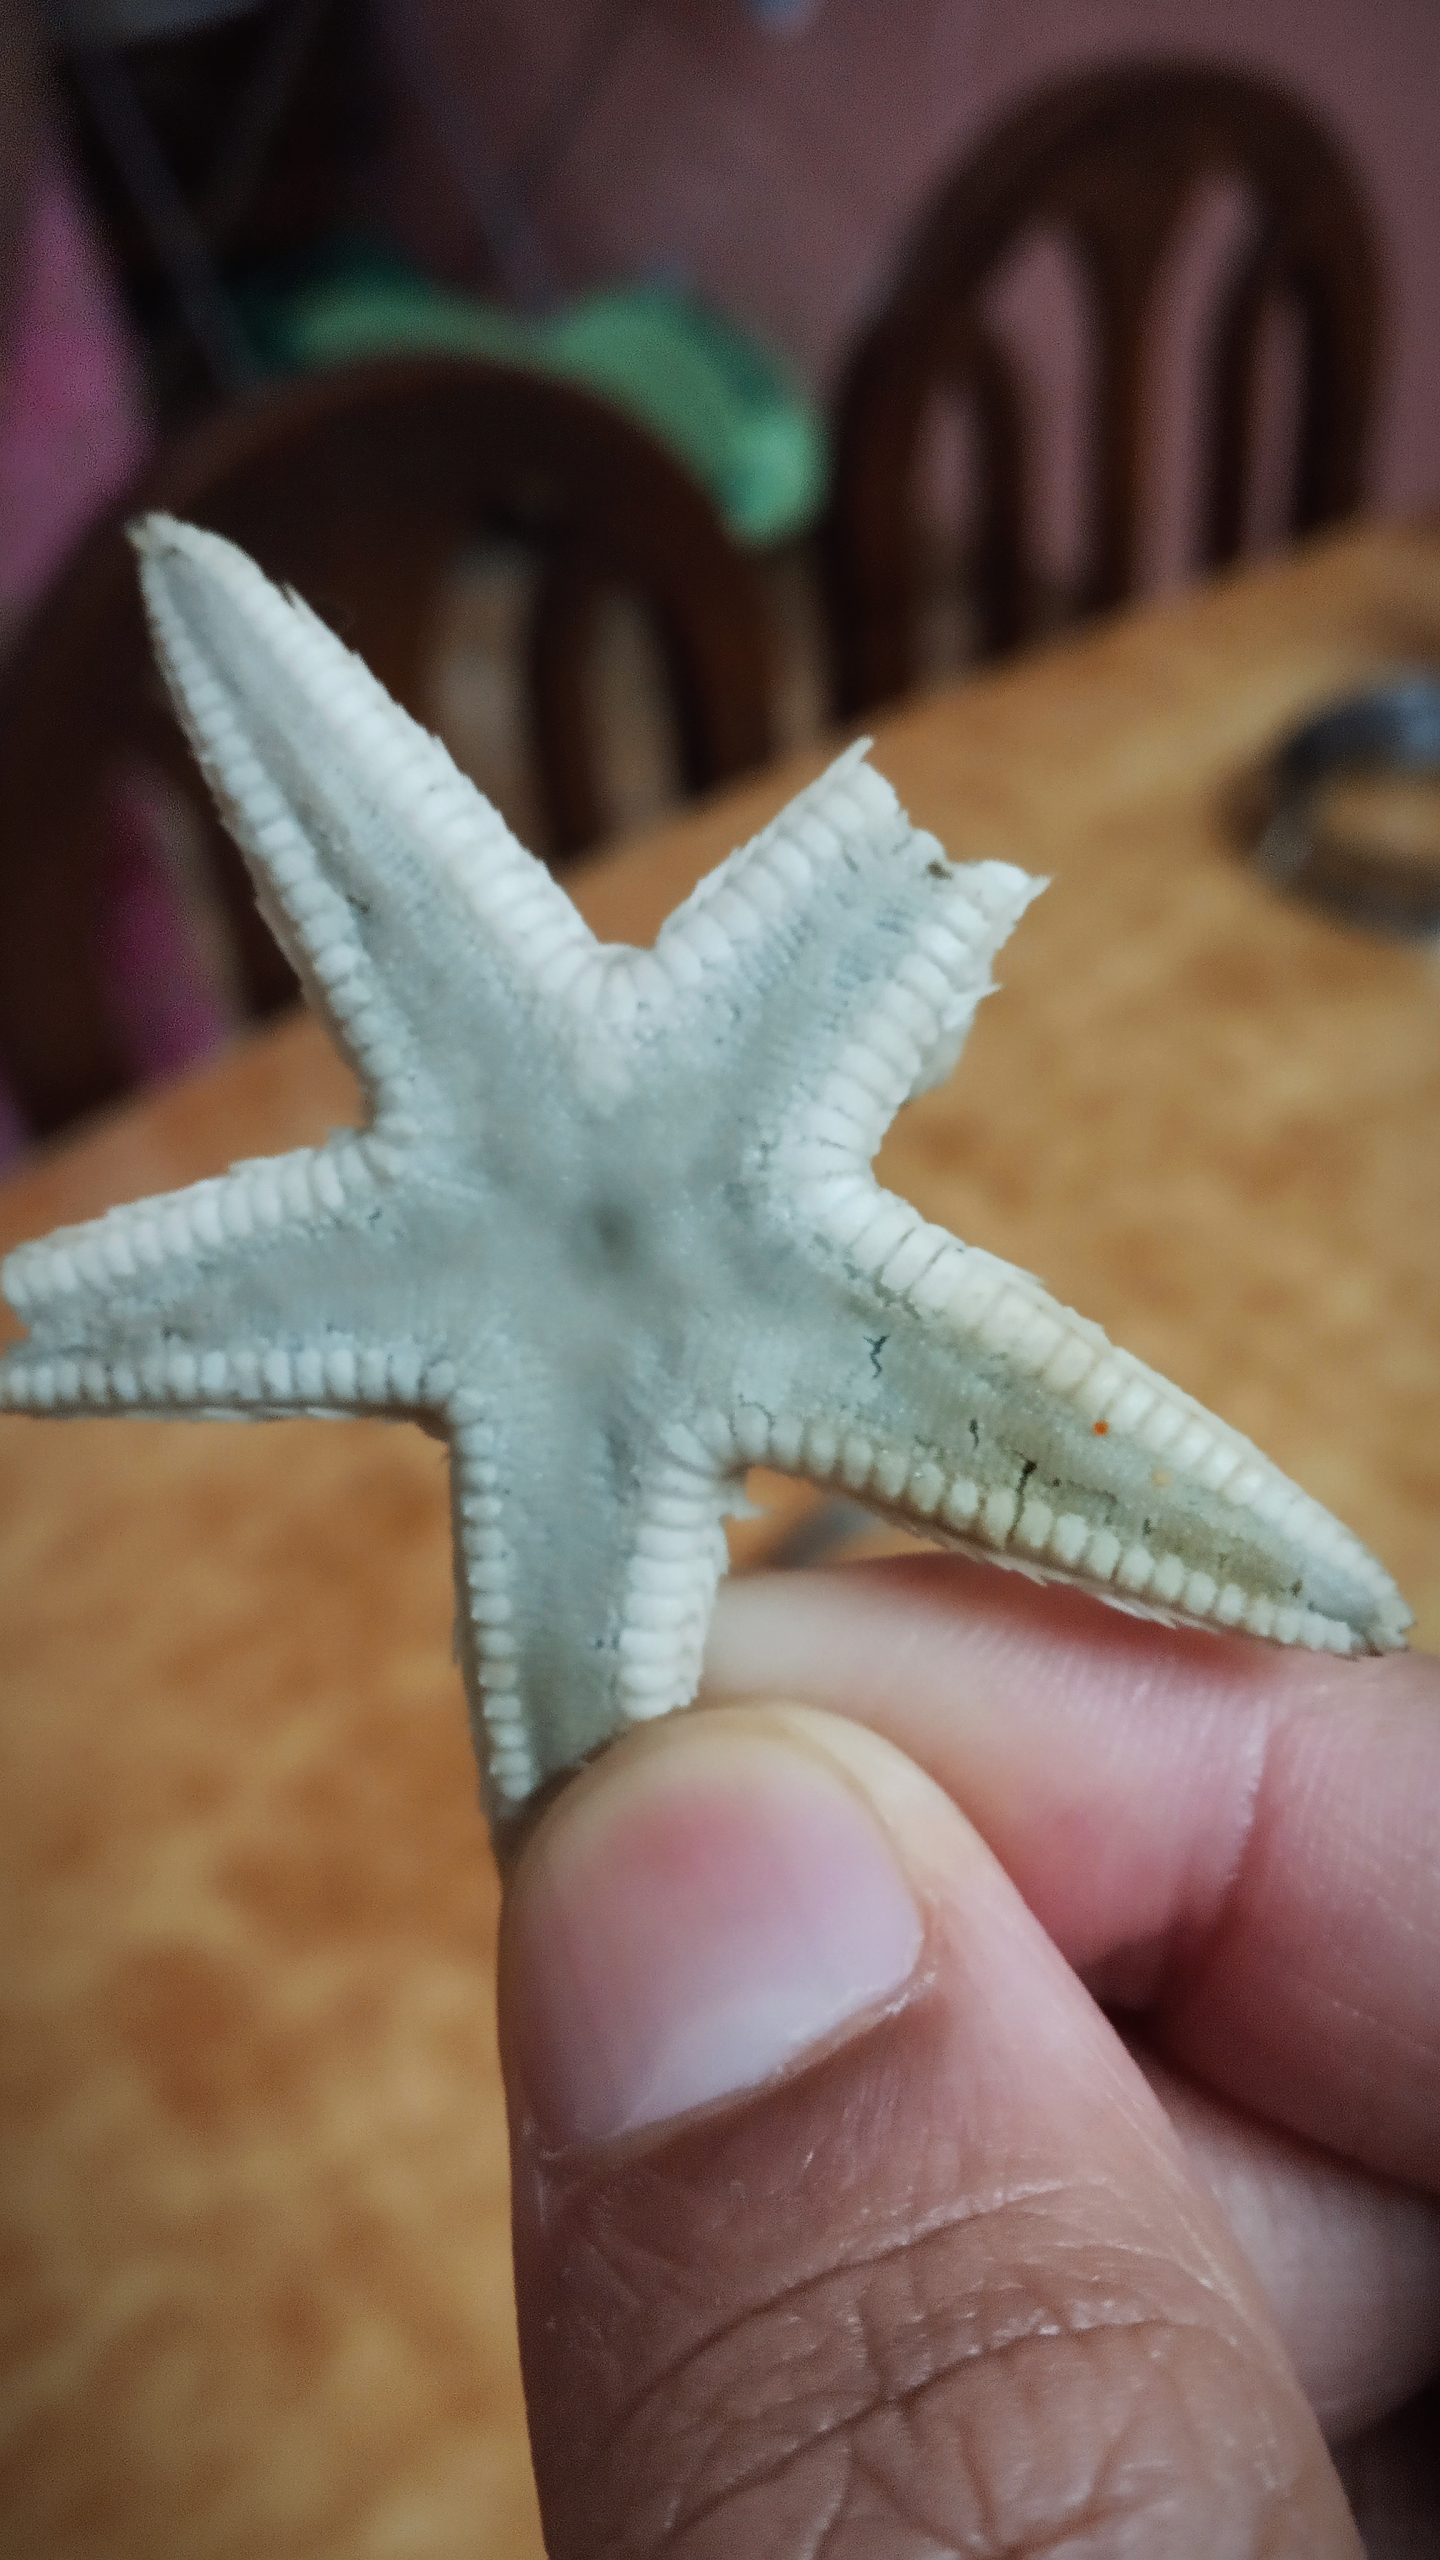 A starfish in hand